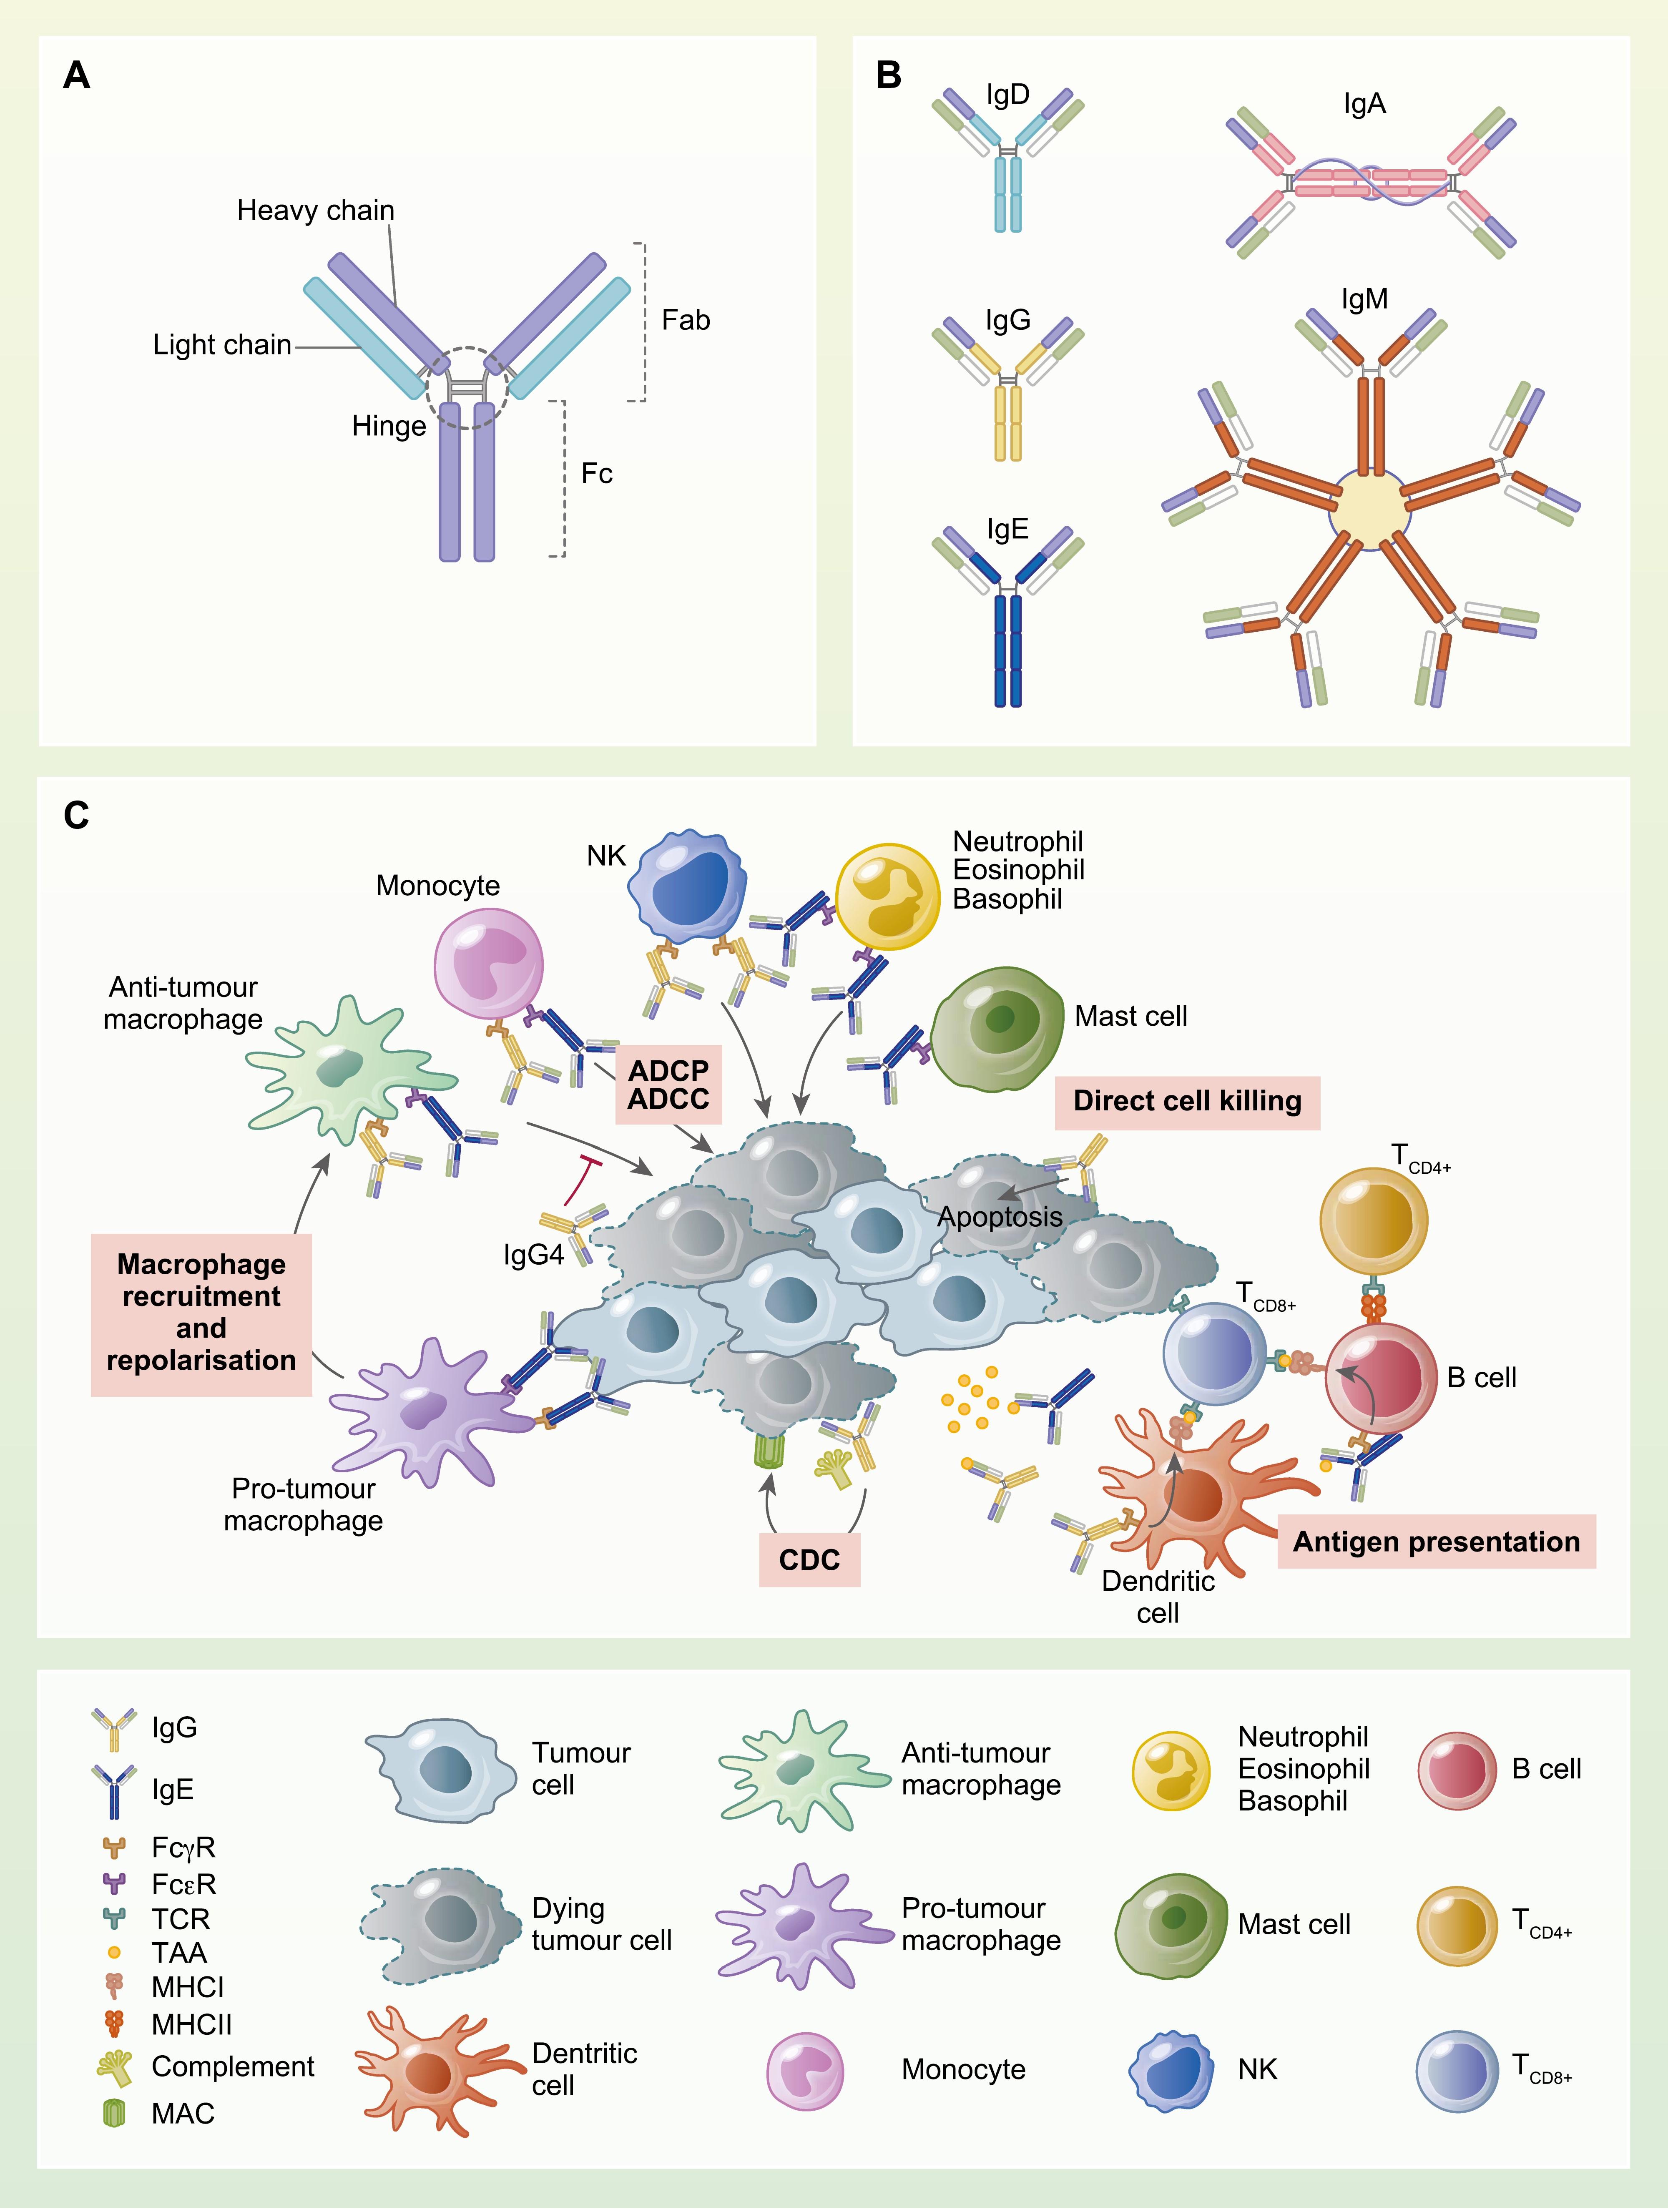 Figure from 'Antibodies as biomarkers for cancer risk: a systematic review'